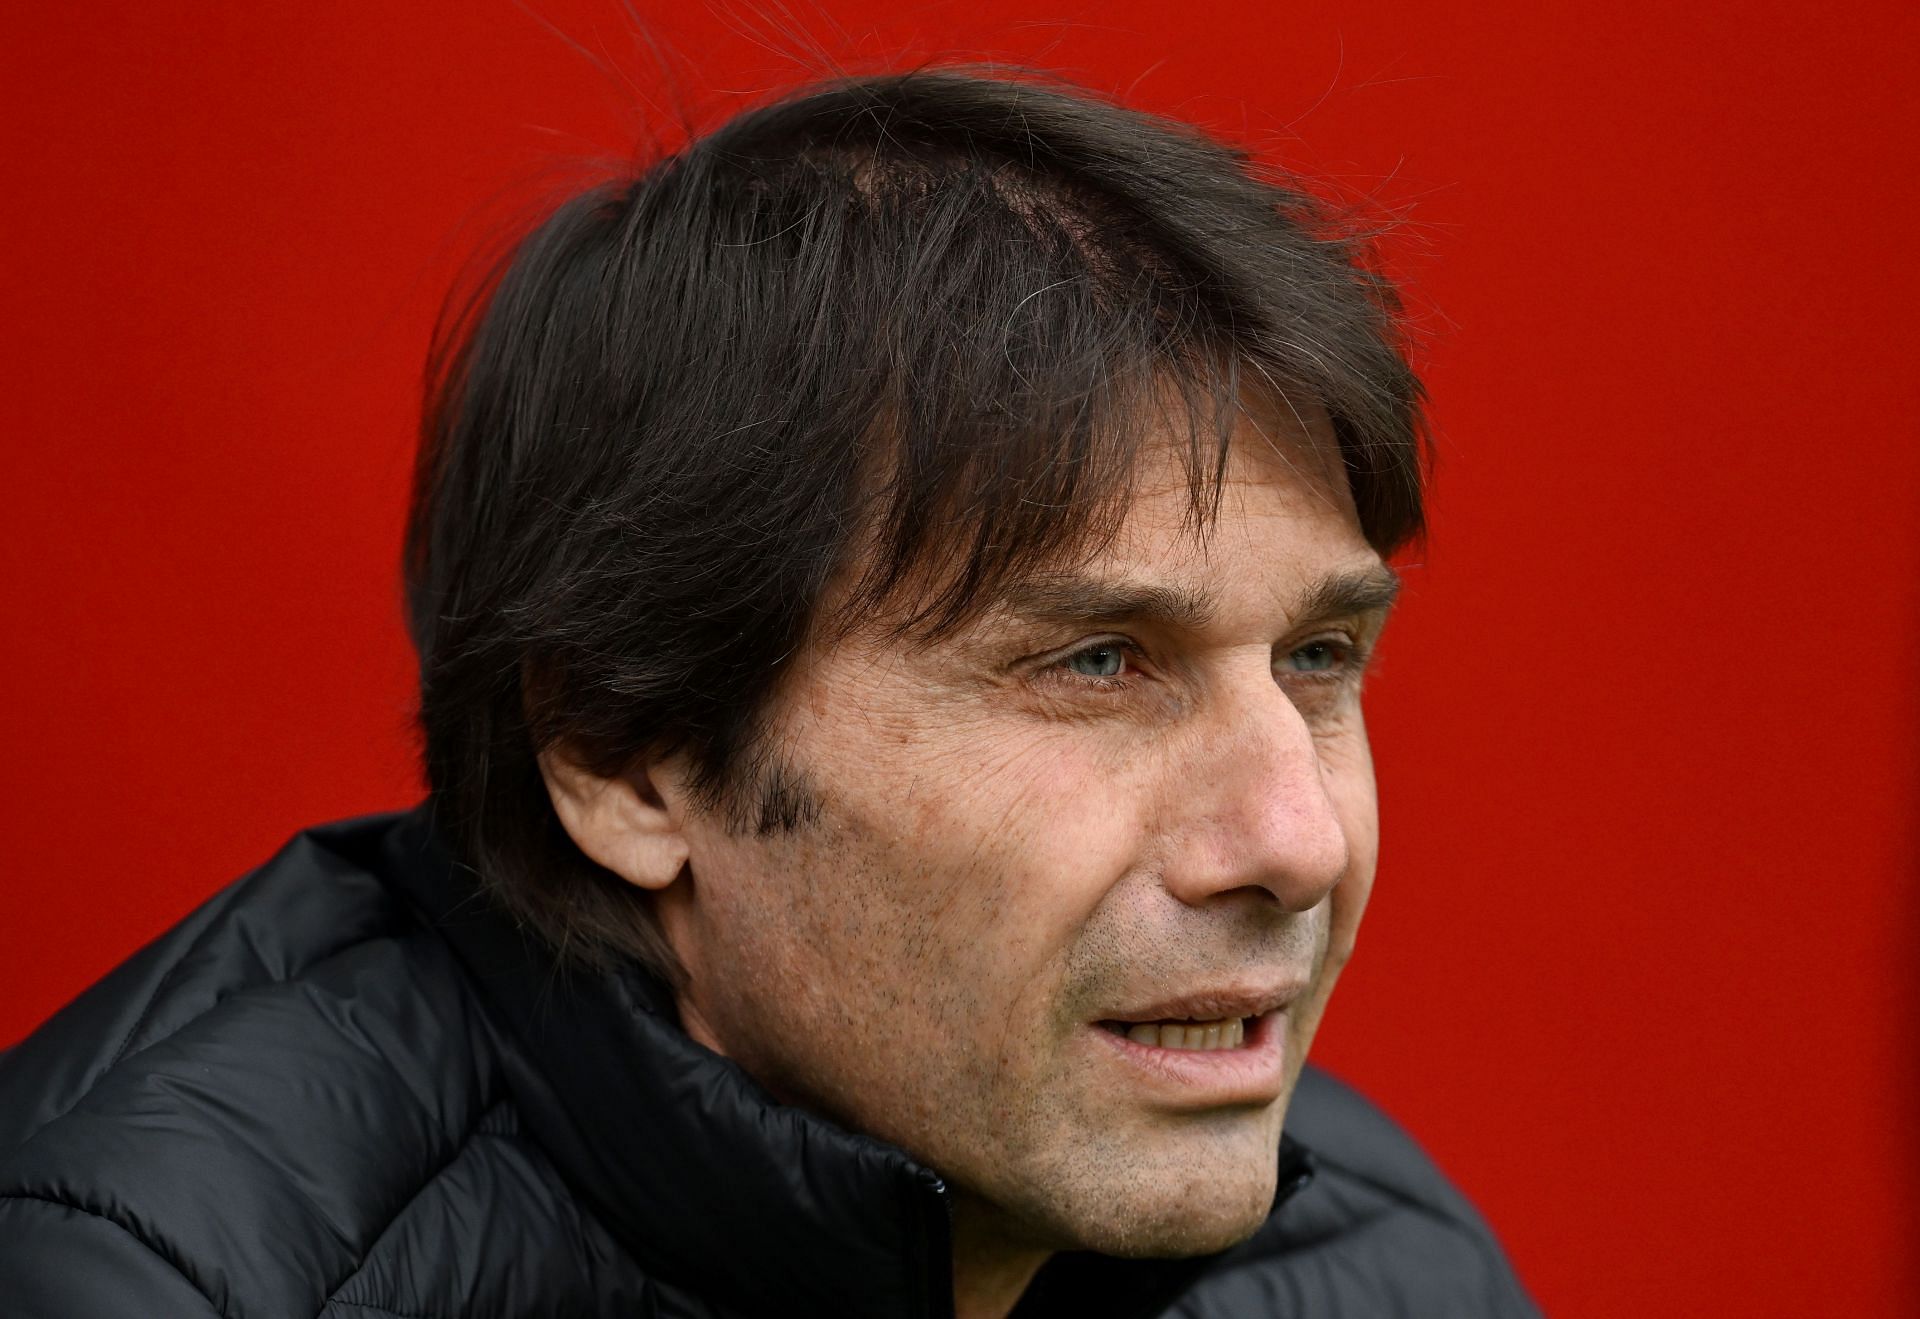 Antonio Conte is not in the discussion to take charge at Stamford Bridge